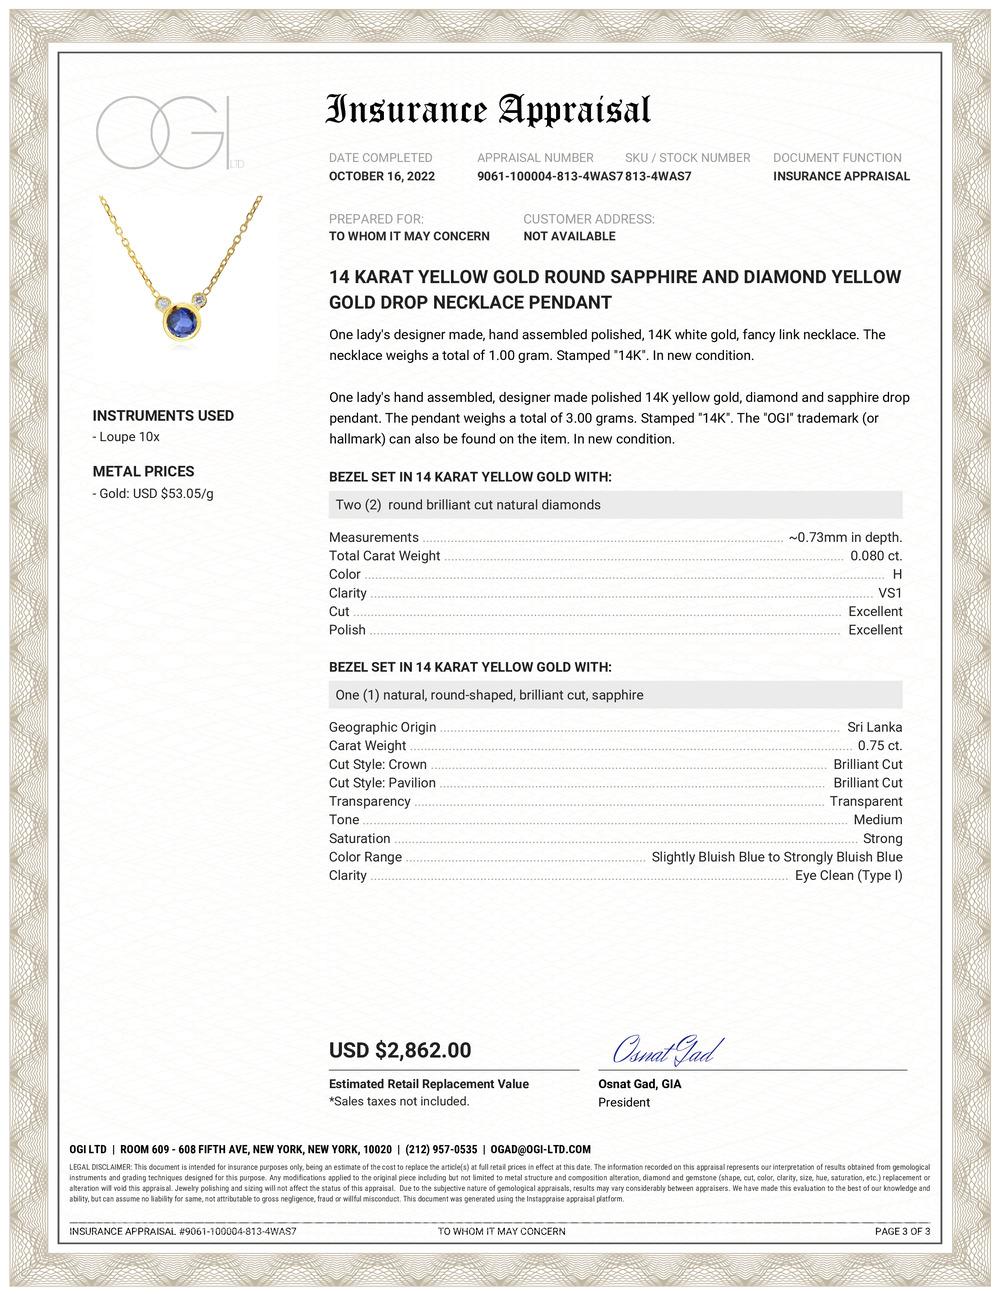 Fourteen karats yellow gold trending layering necklace pendant 
One round sapphire bezel set weighing 0.75 carats
Two bezel set diamonds weighing 0.08 carats set in 14 karat white gold 
Chain measuring 16 inches long
Cable chain necklace with a